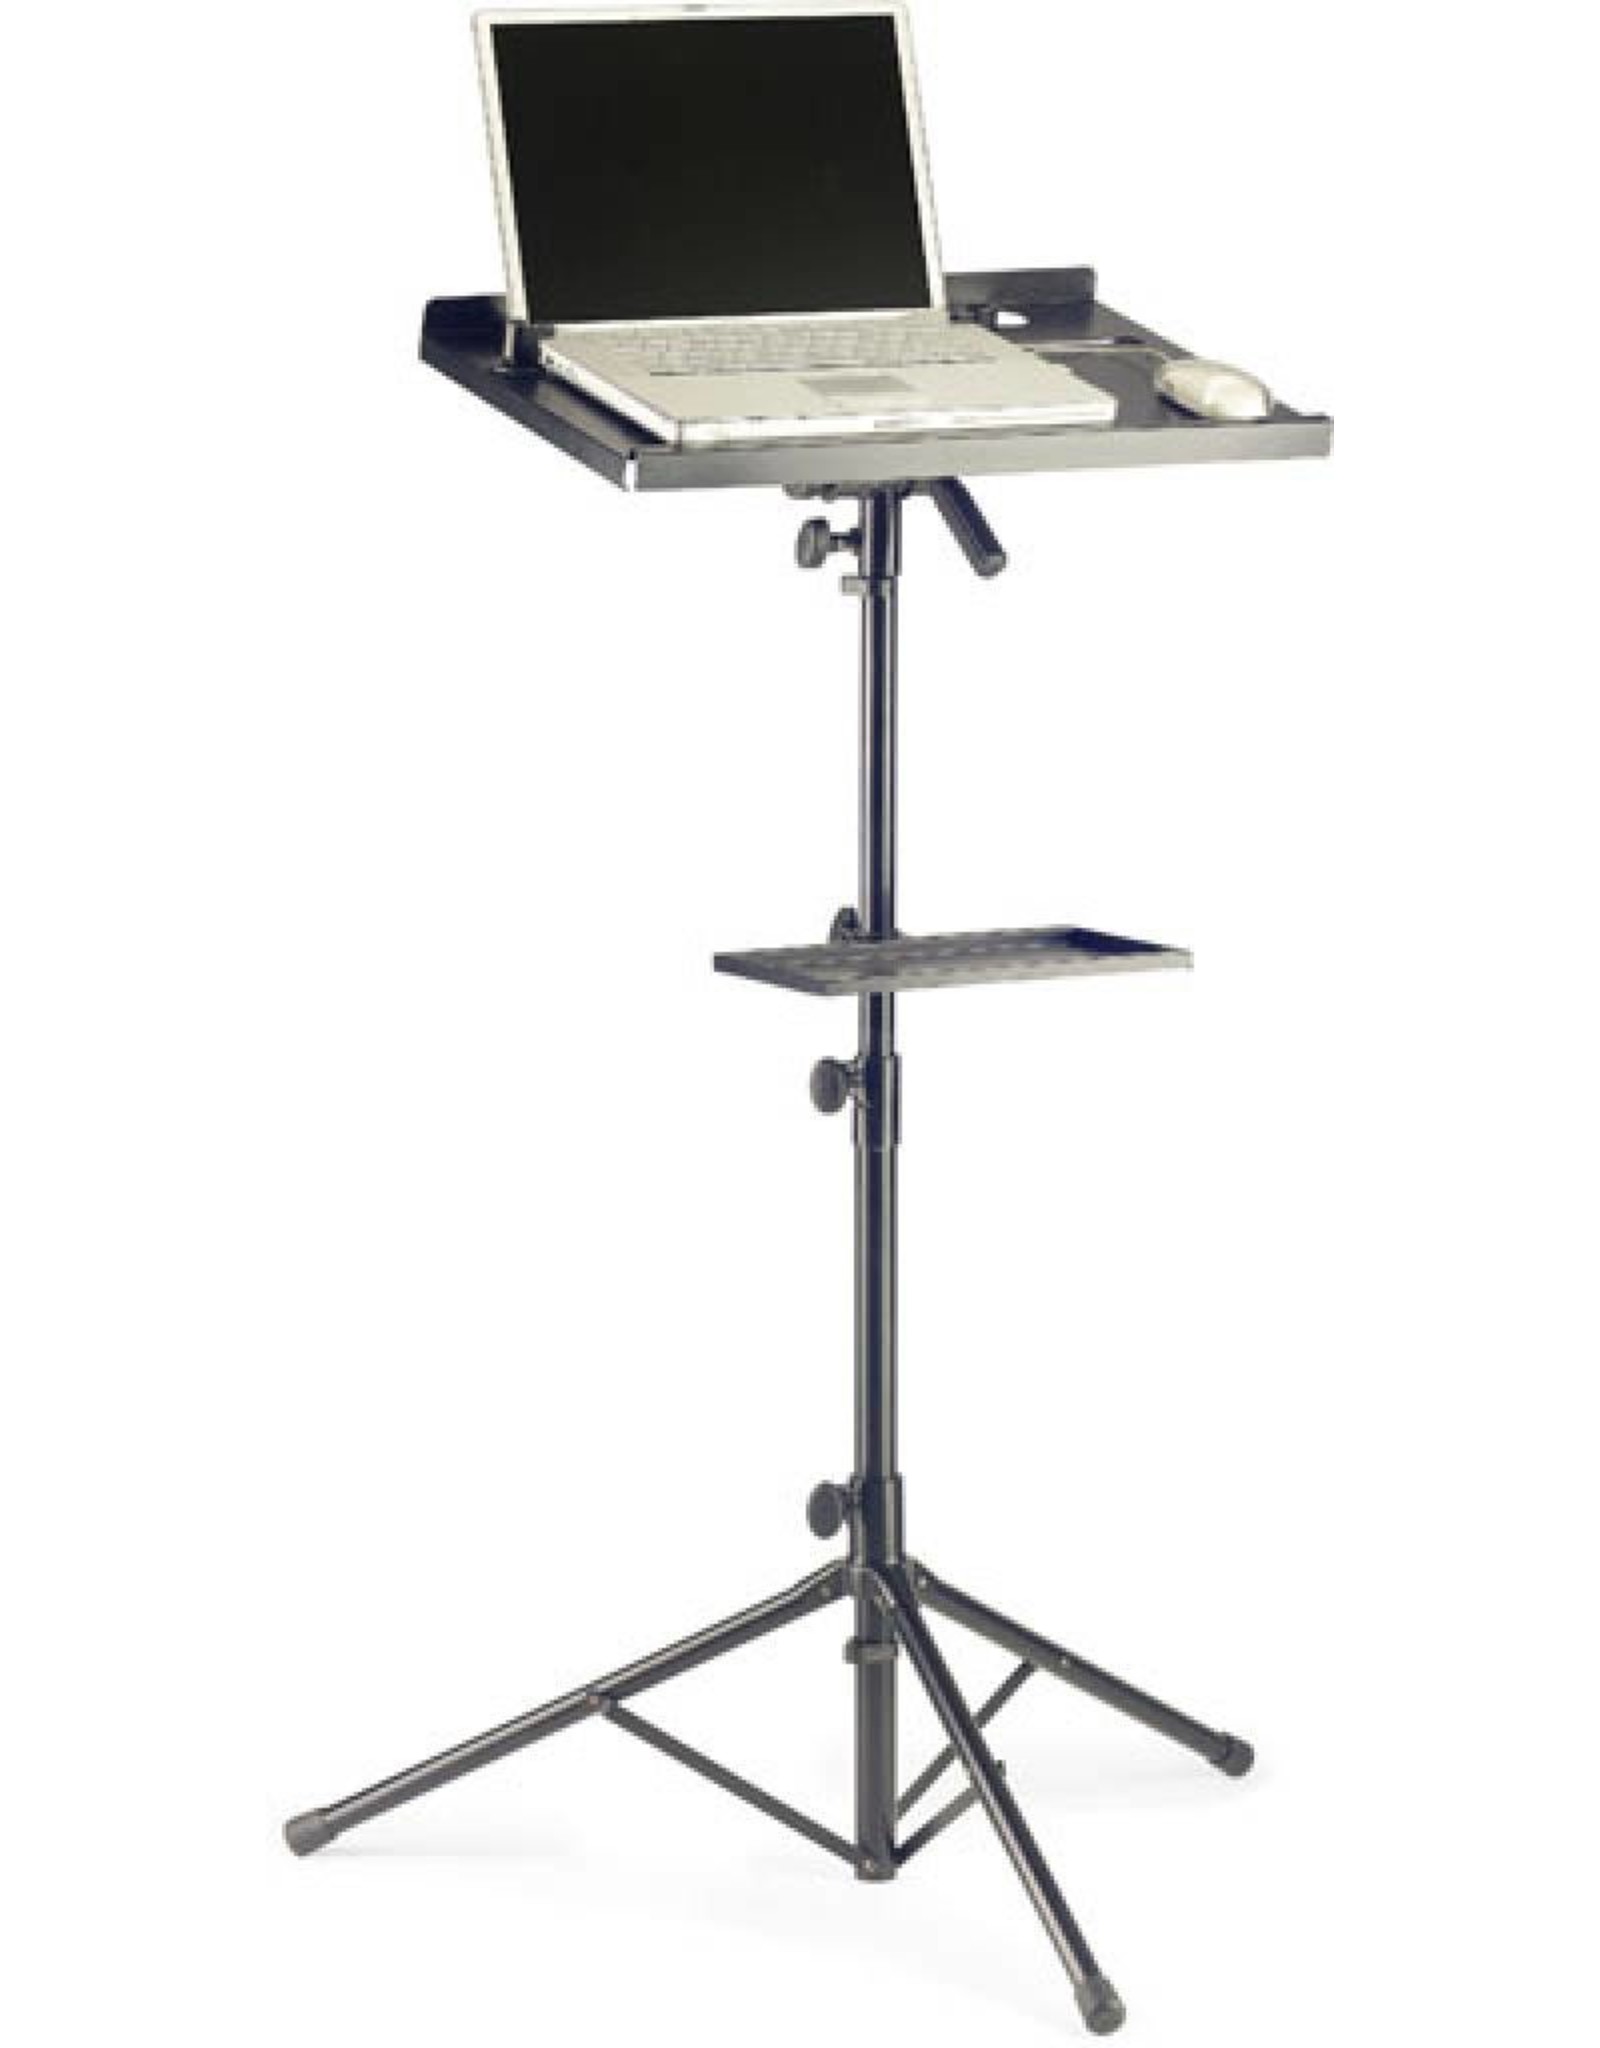 Stagg  COS10BK laptop stand with additional leaf